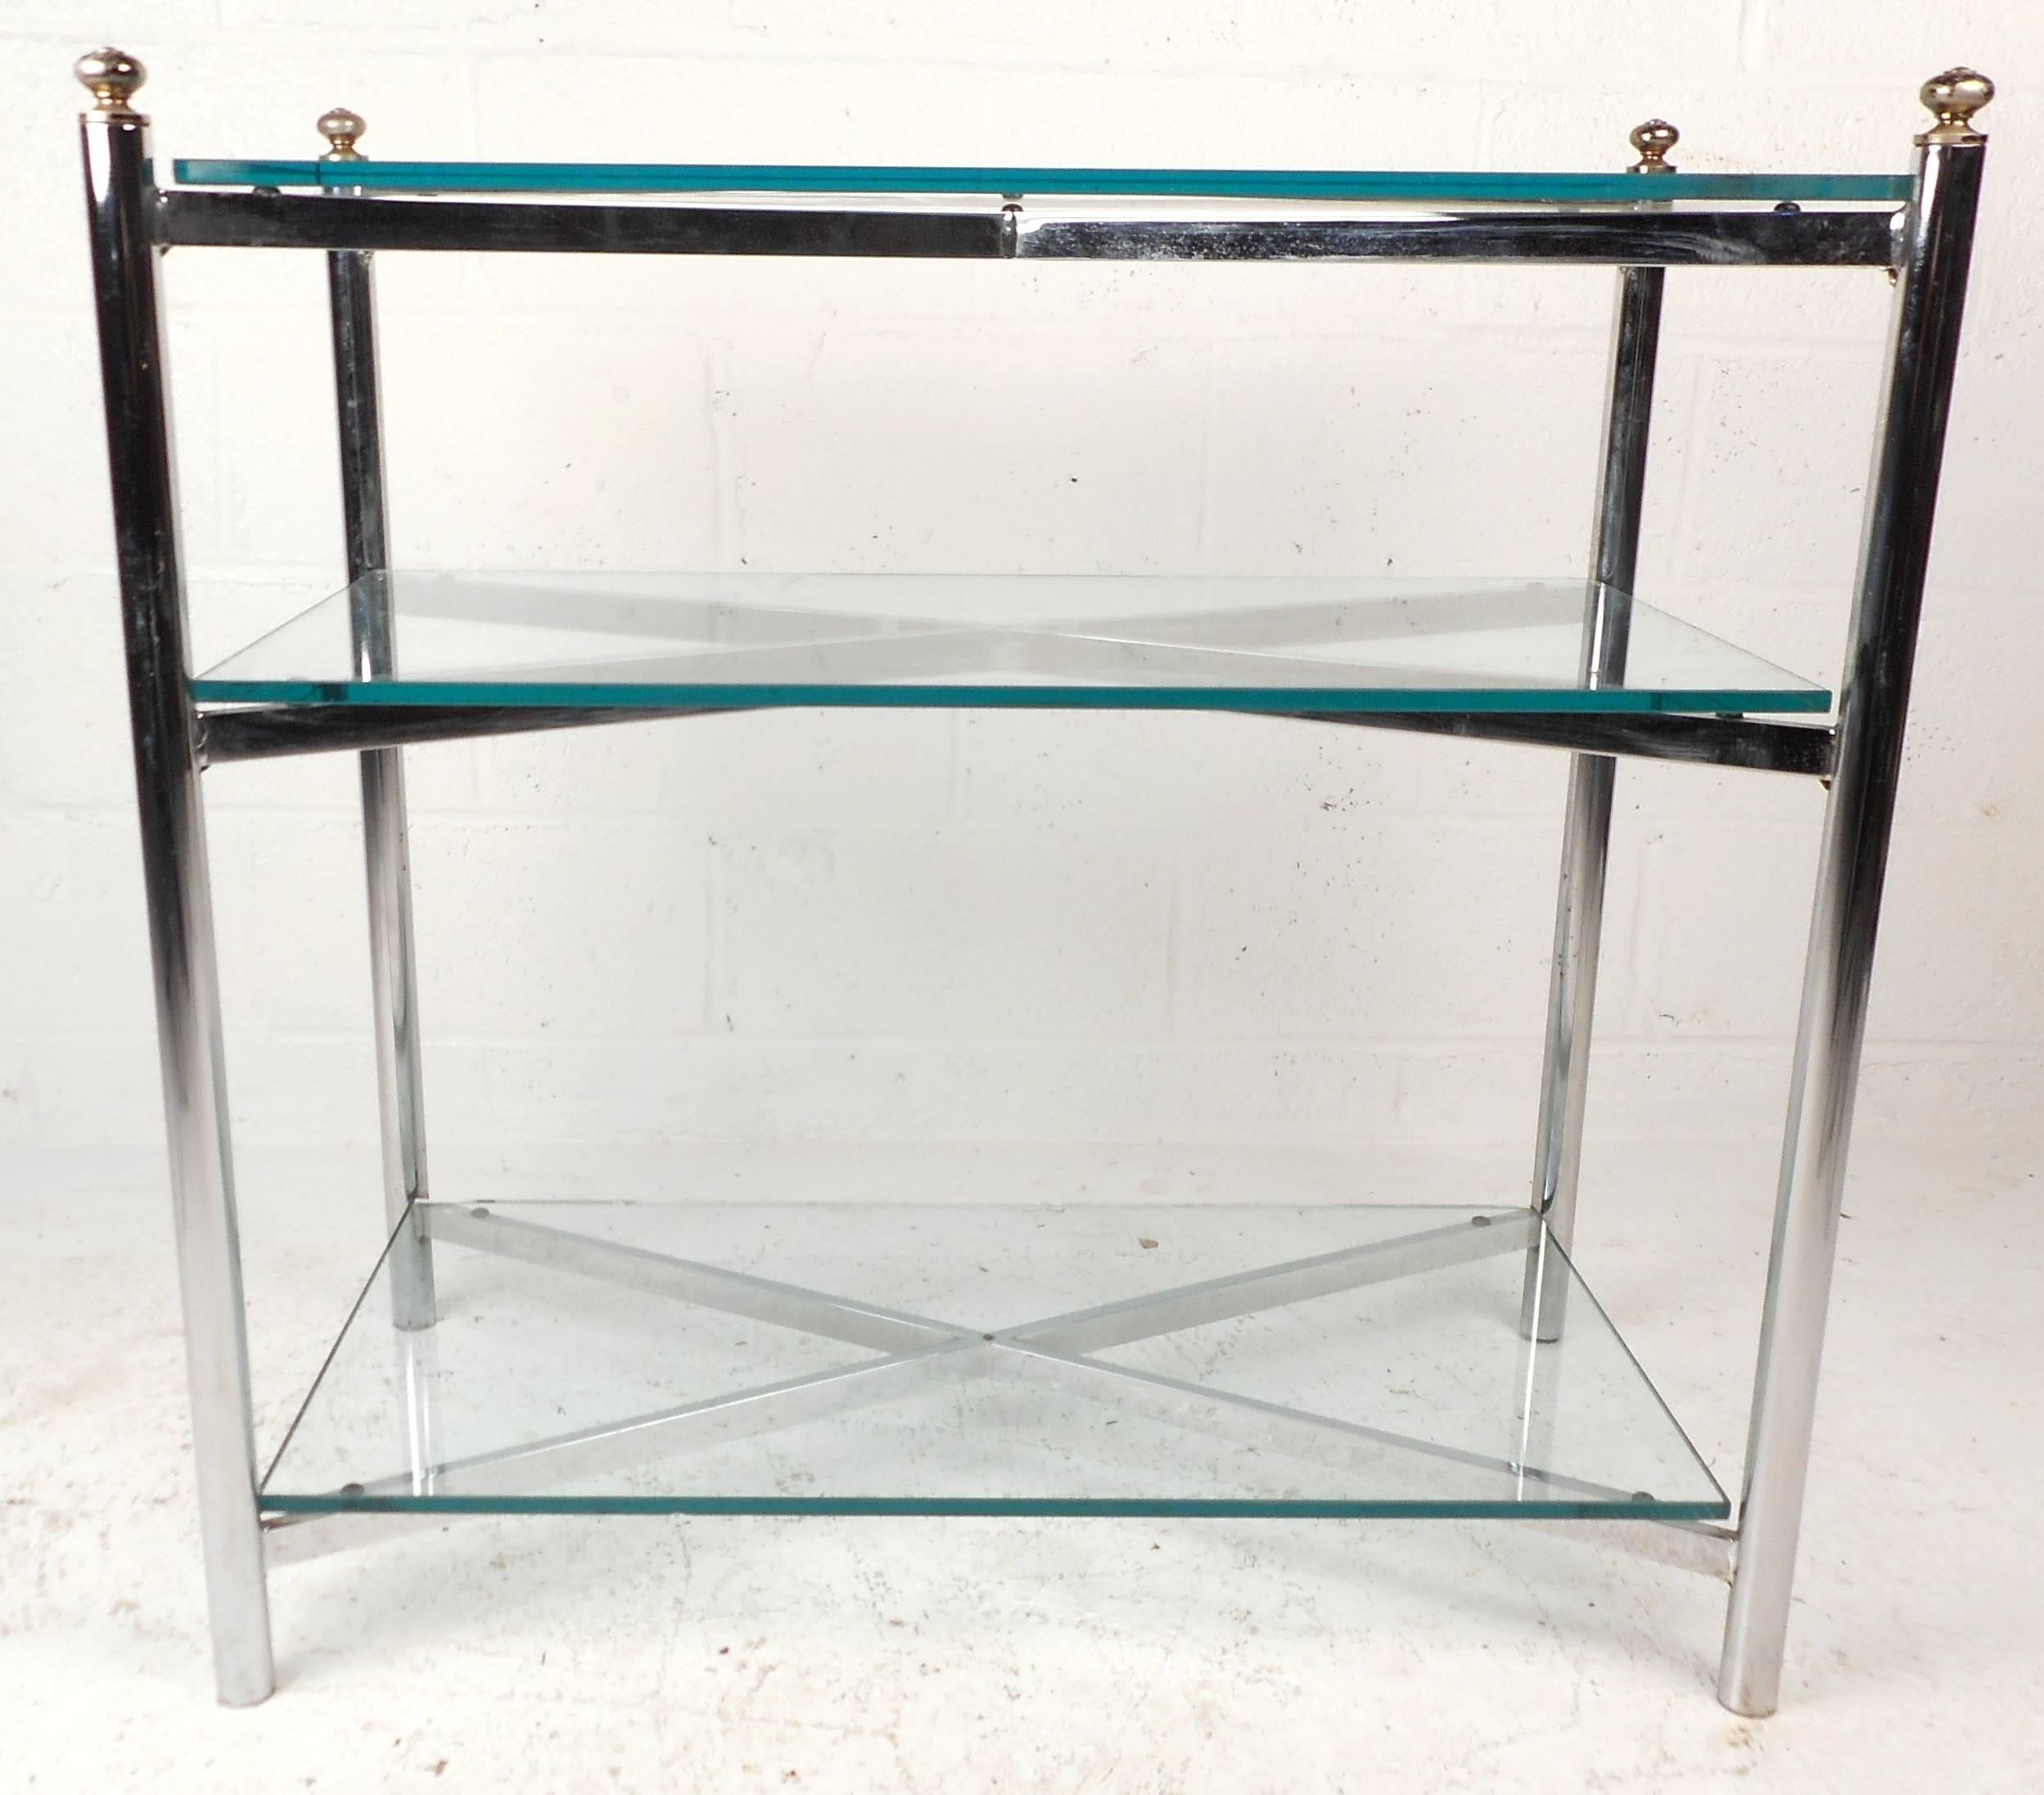 Unique modern chrome and glass display shelf features three glass shelves, chrome supports, and brass trim in the style of Maison Jansen. Unique design fits a variety of uses from storage to display, all while adding style and grace to any interior.